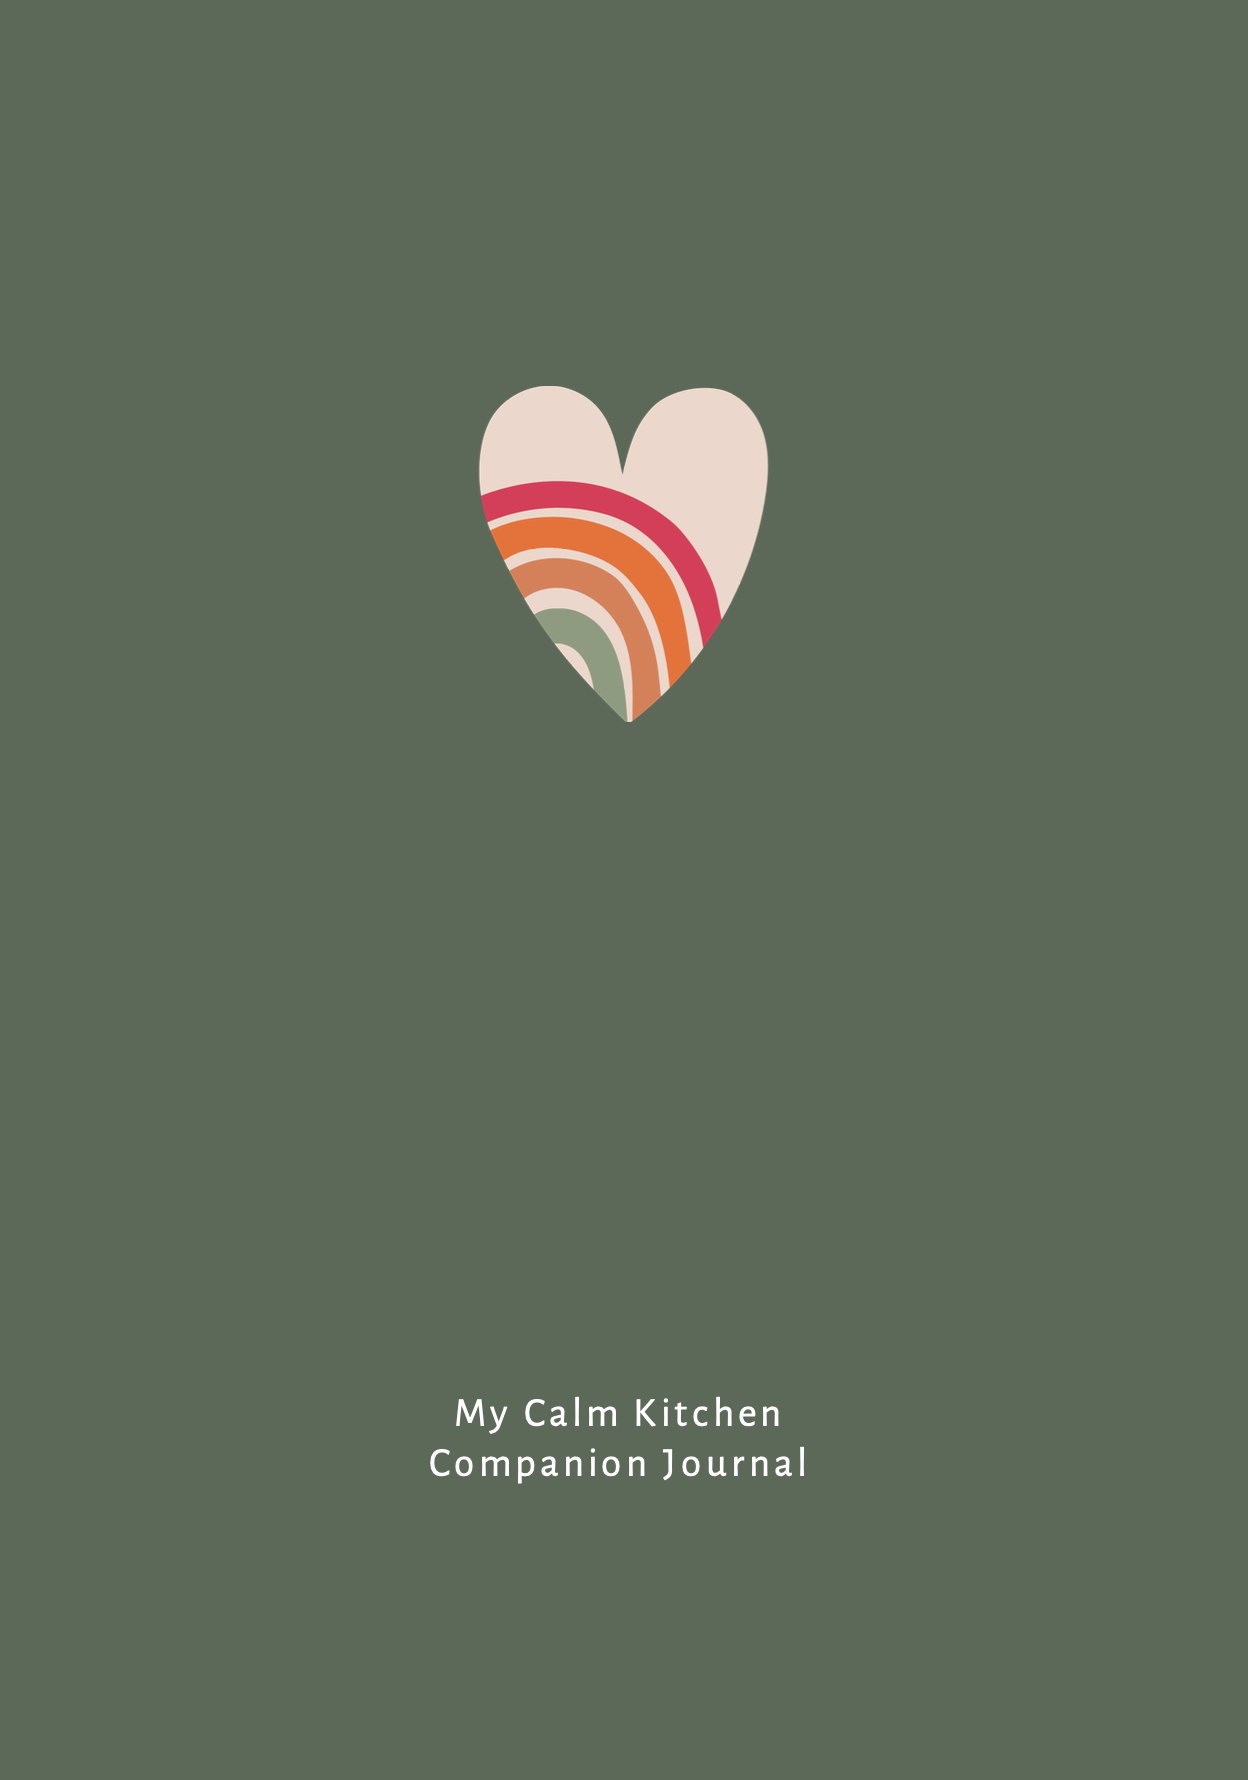 My Calm Kitchen Companion Journal Cover.png